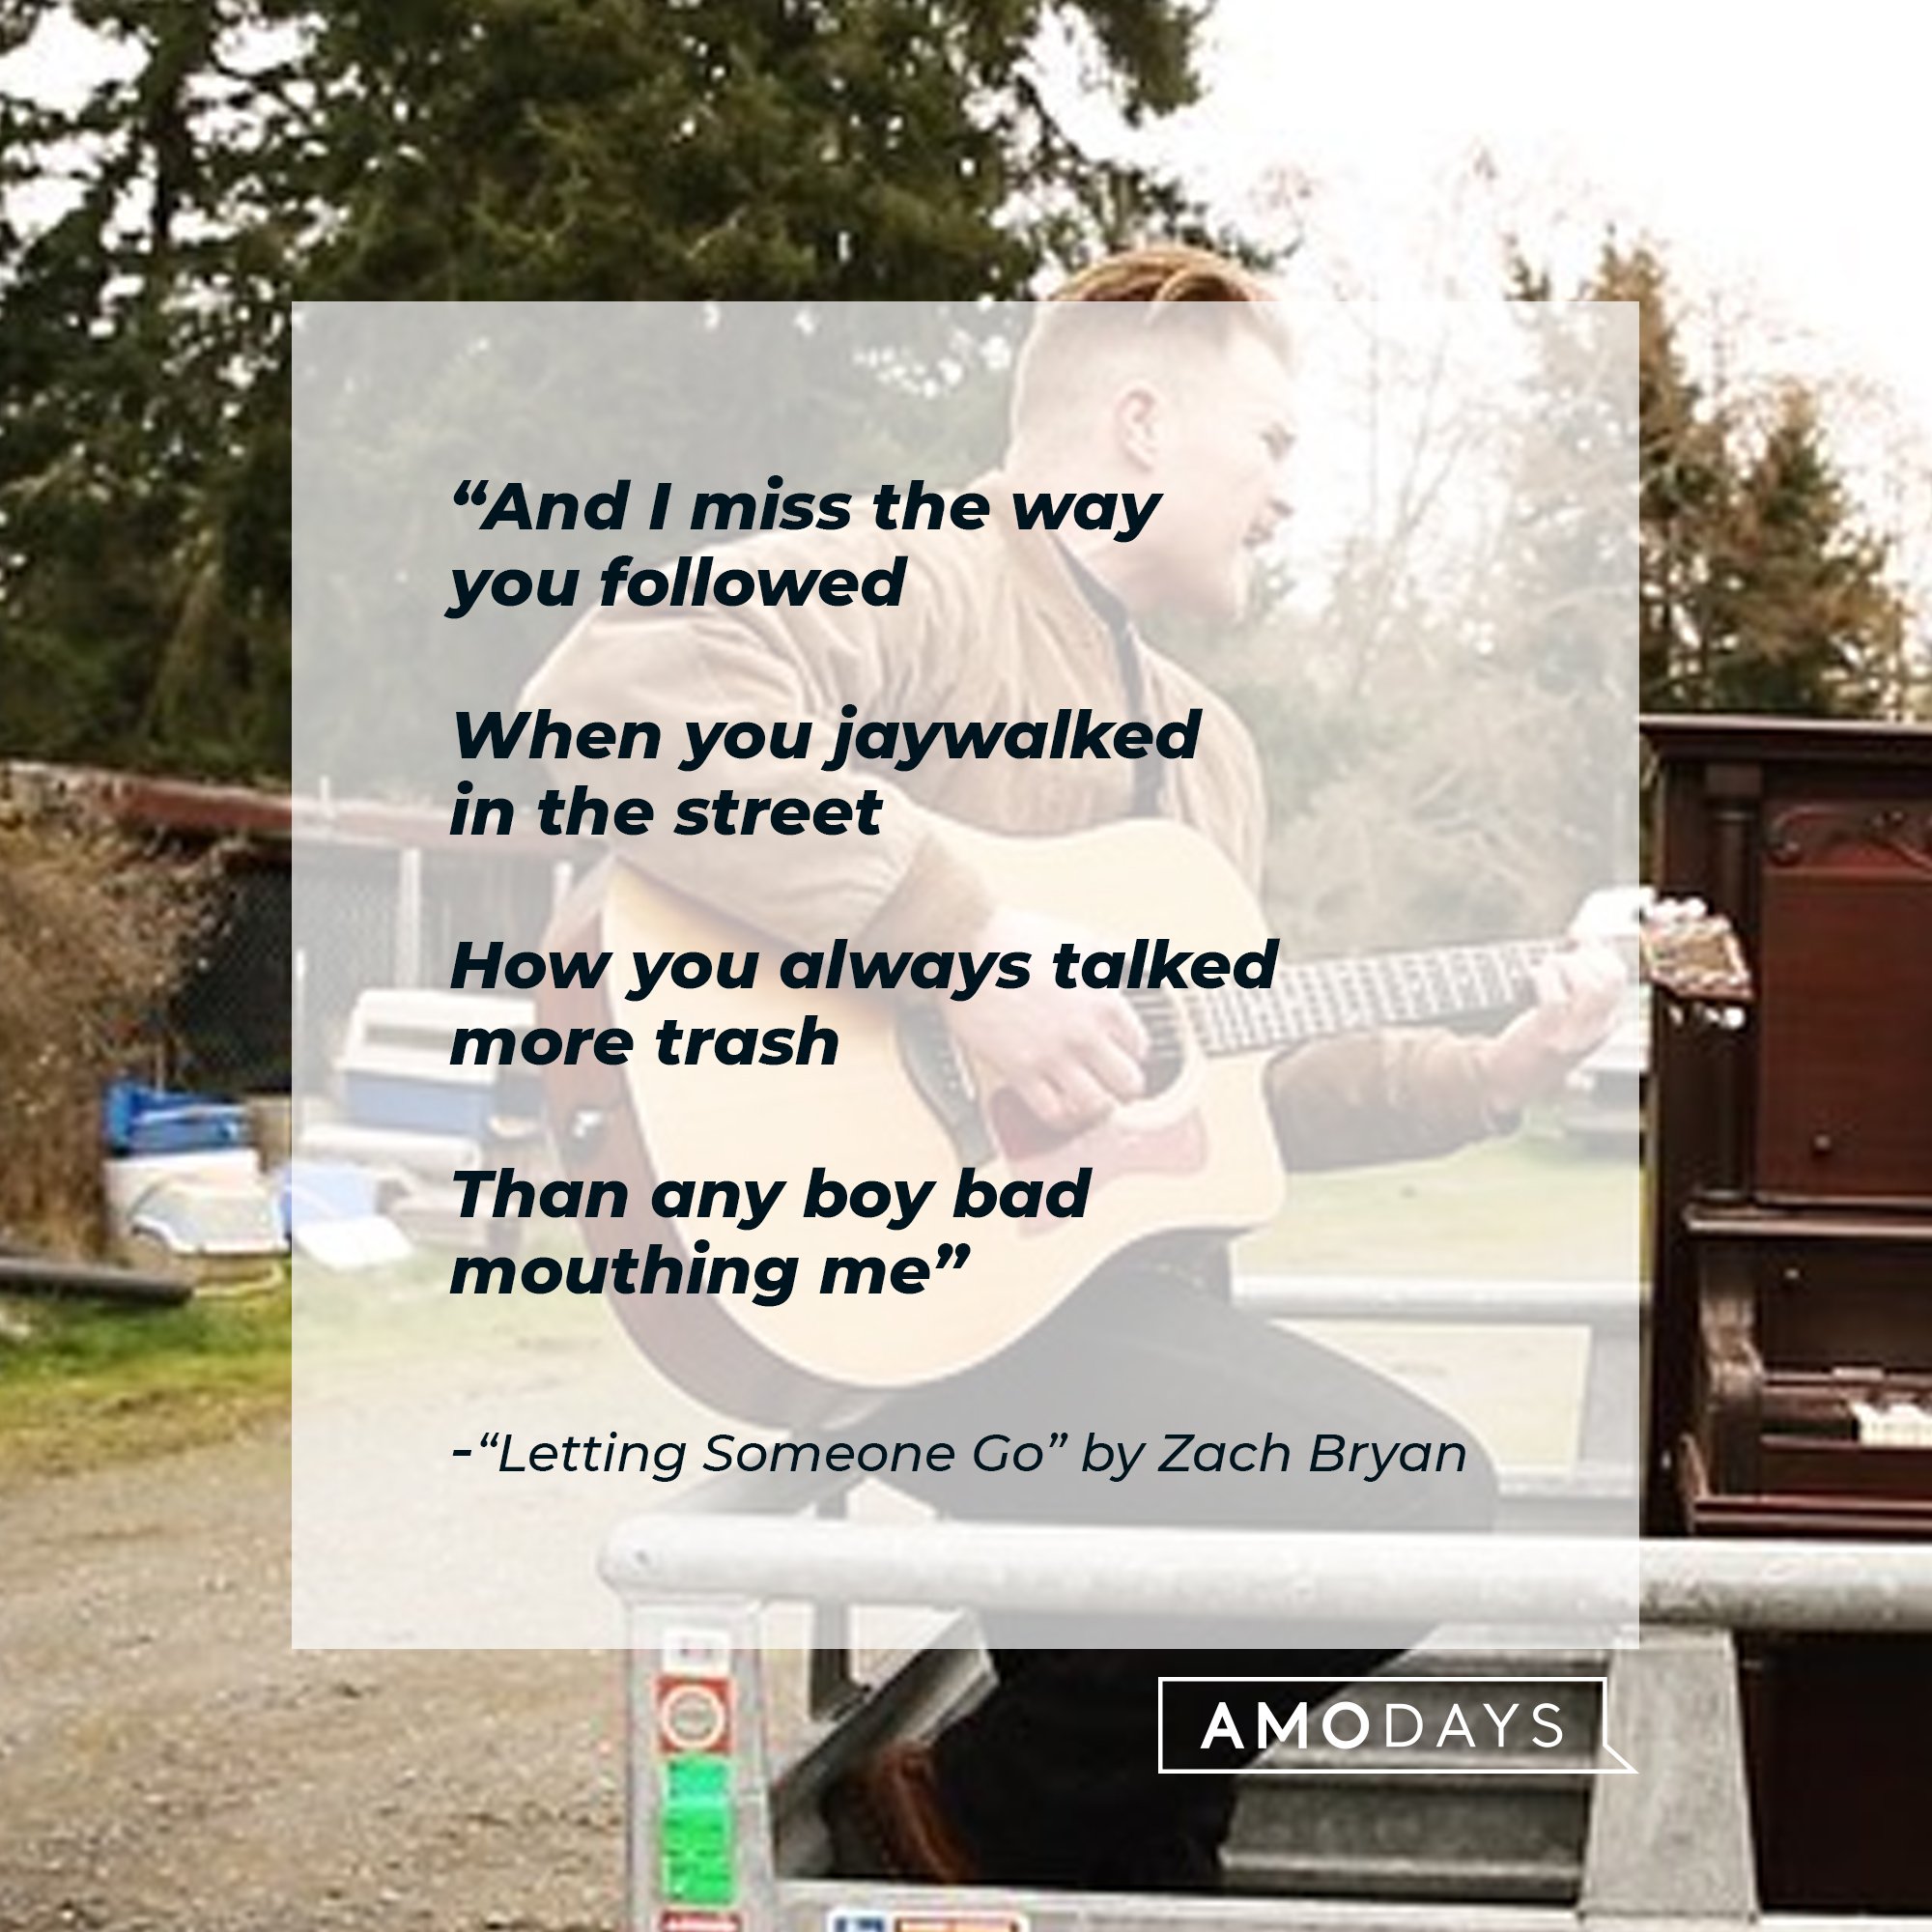  Zach Bryan’s lyrics from "Letting Someone Go”: "And I miss the way you followed/ When you jaywalked in the street/ How you always talked more trash/ Than any boy bad mouthing me” | Image: AmoDays